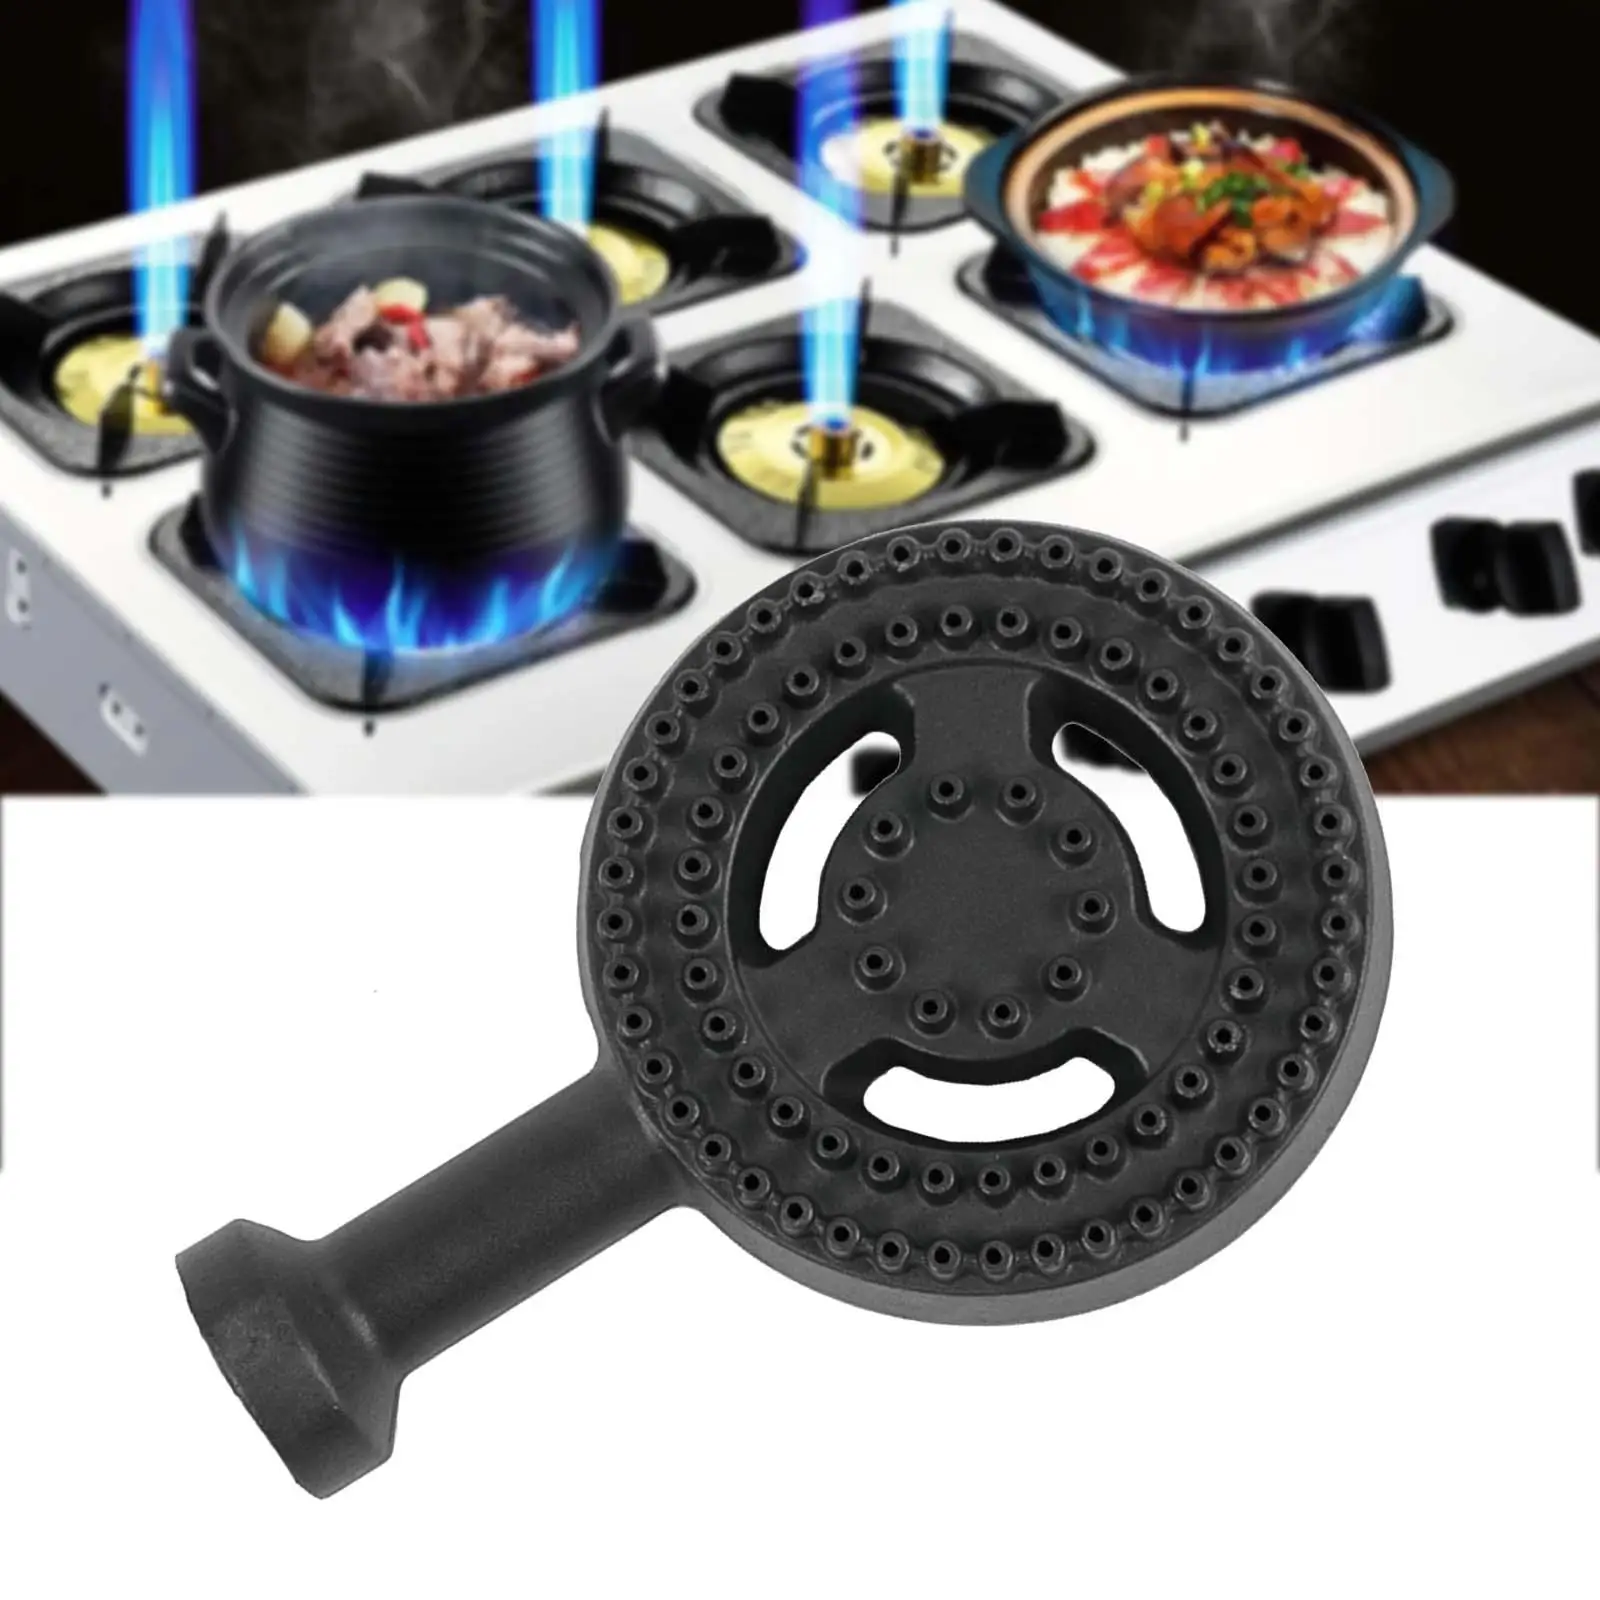 Outdoor Cooker Burner Round Burner Gas Stove Head for Picnics Hiking Camping